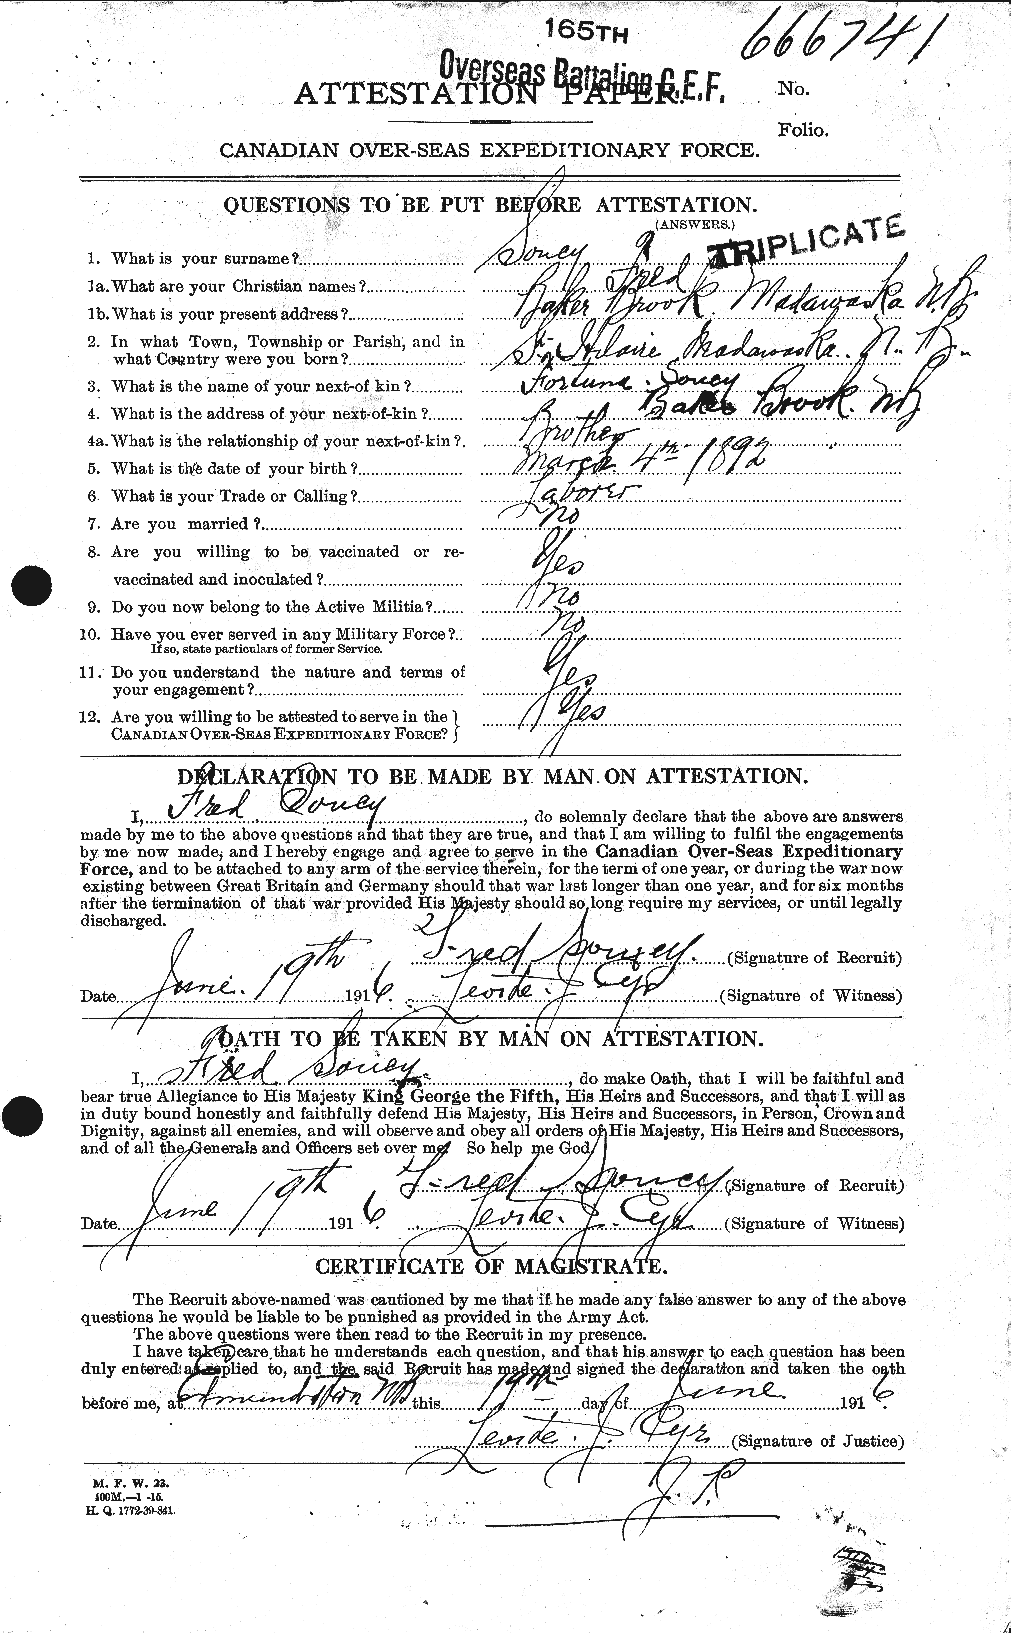 Personnel Records of the First World War - CEF 109566a